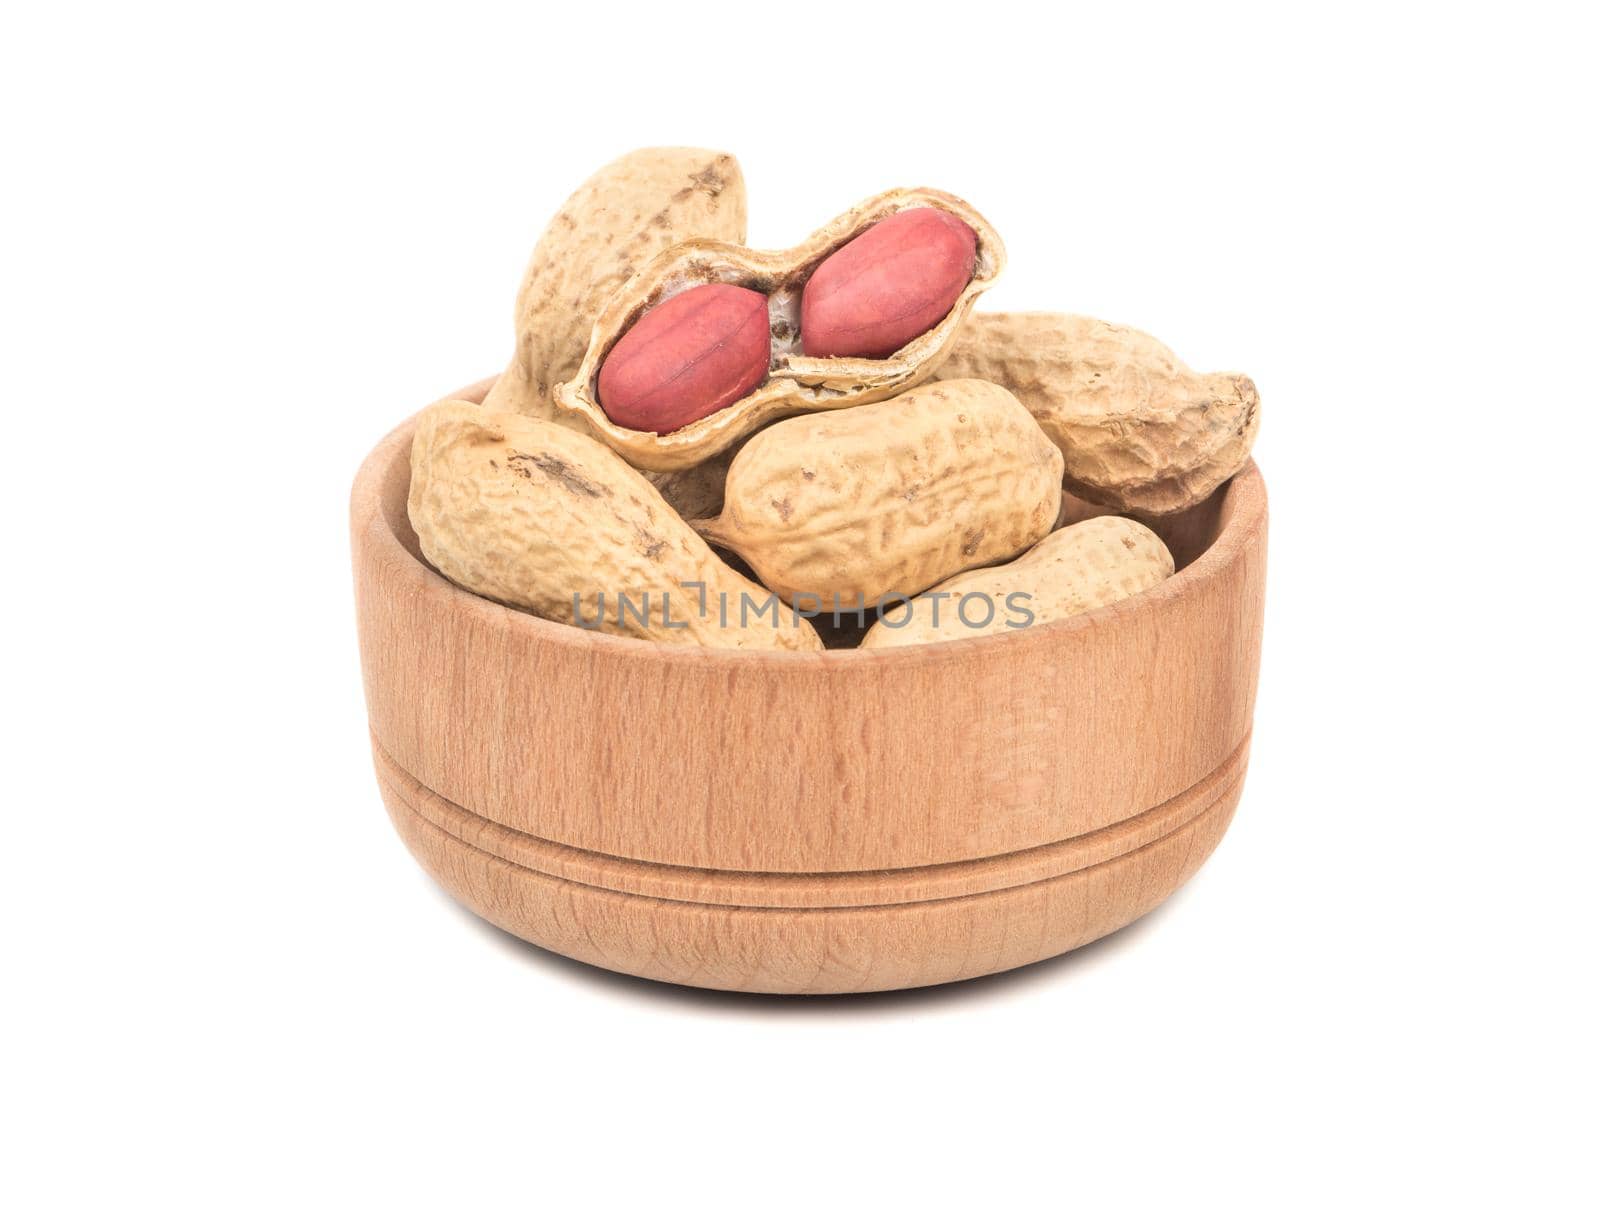 Dry peanuts in shell in a wooden bowl on a white background